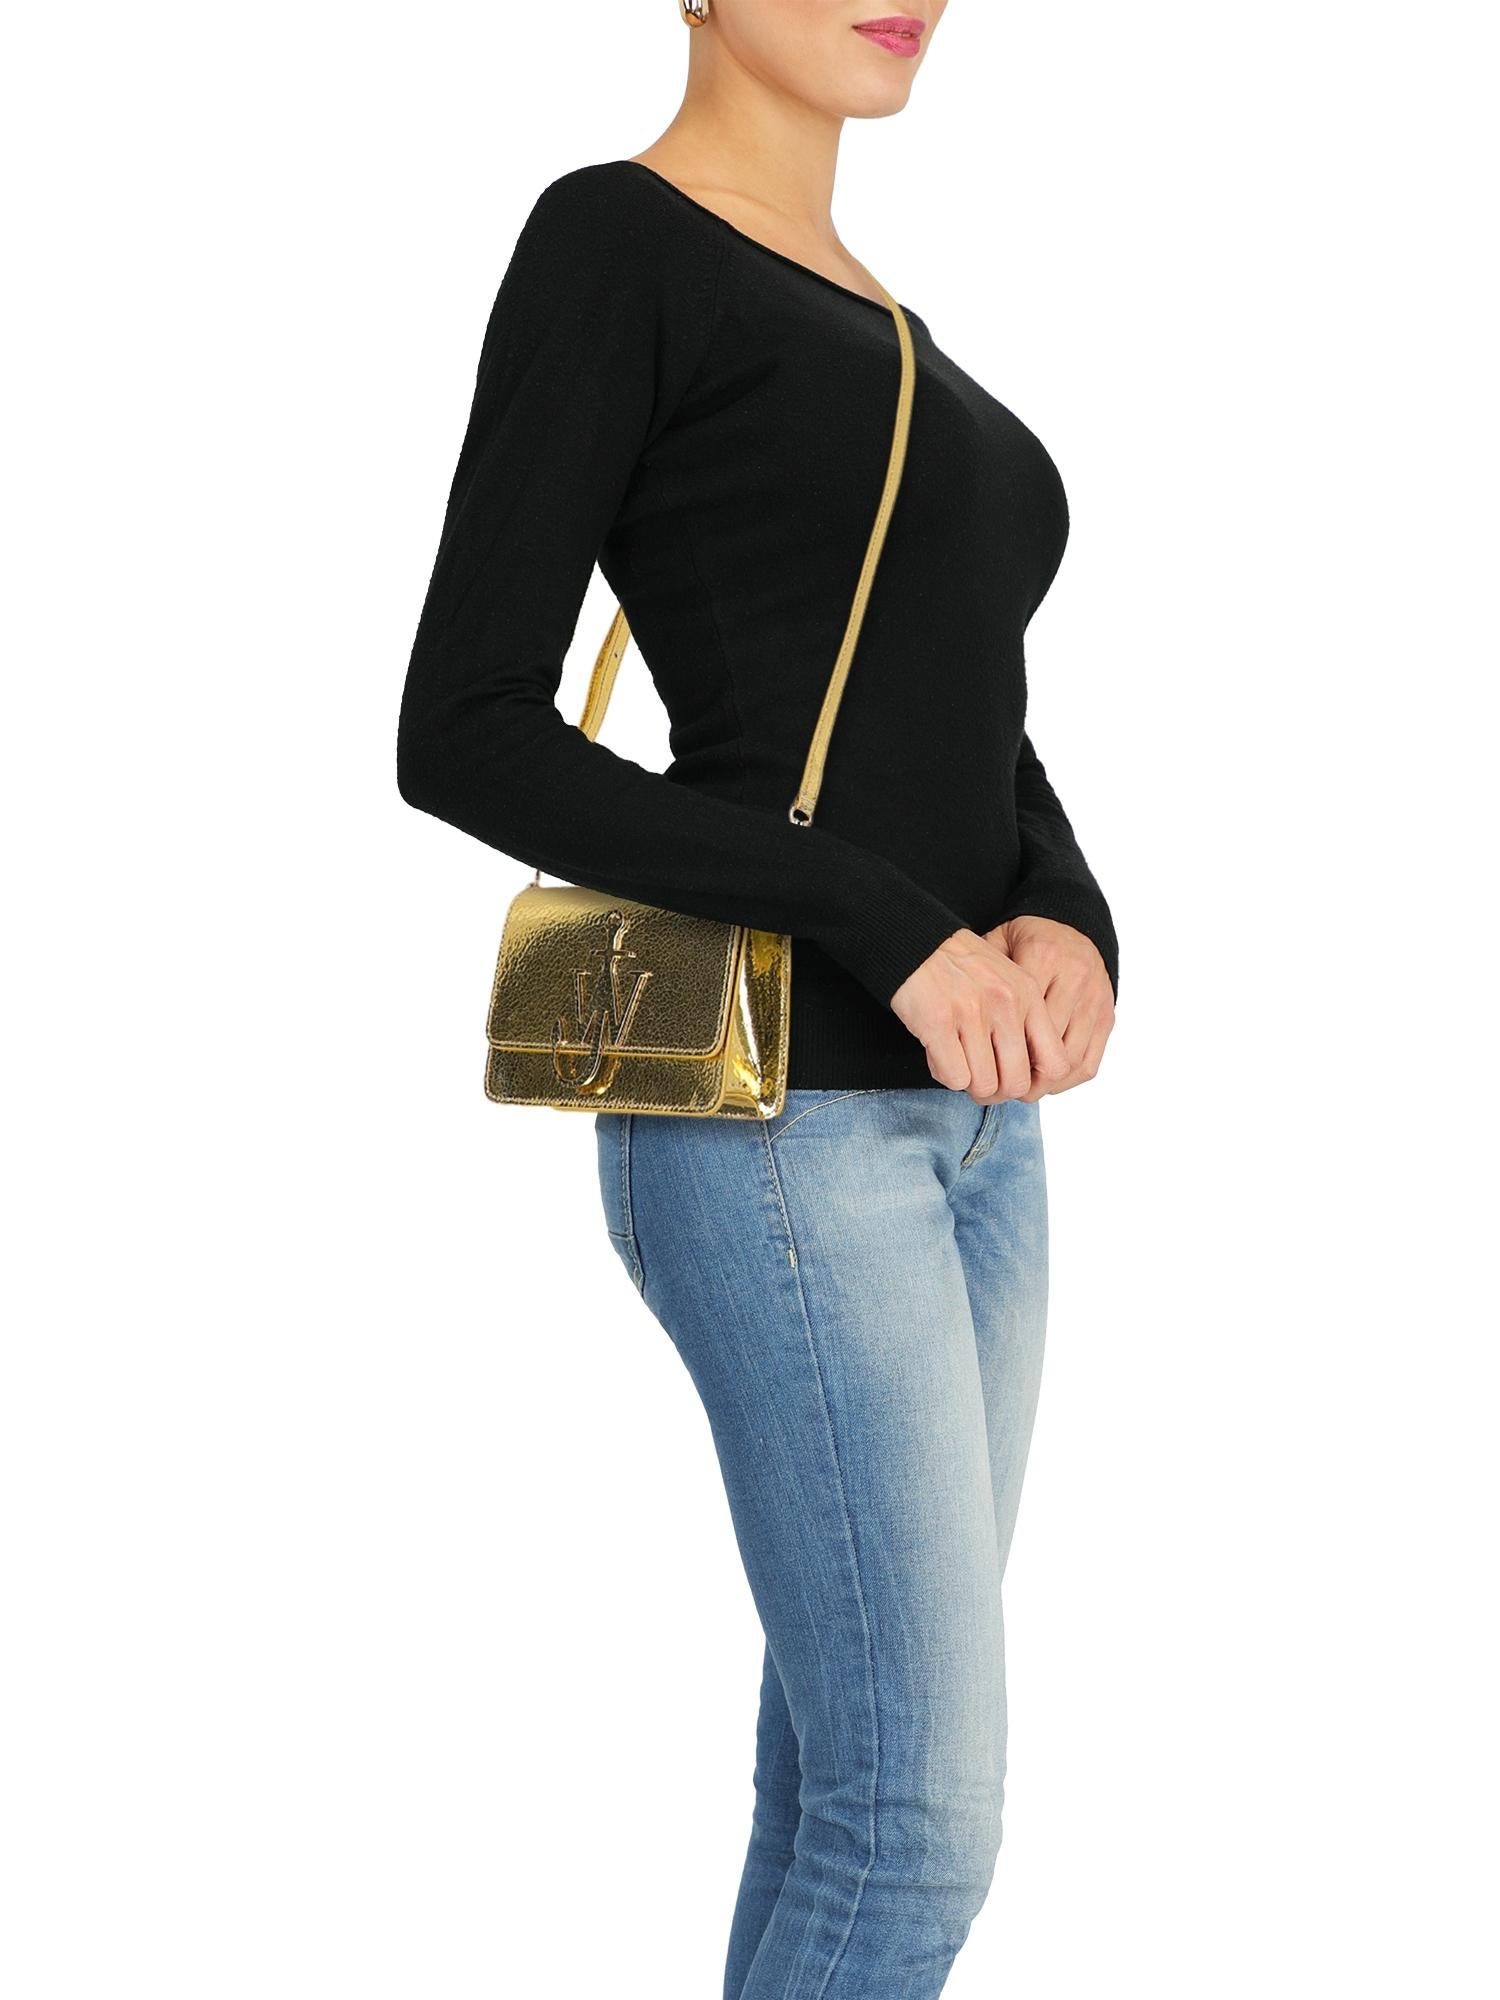 Woman, leather, solid color, crinkle effect, front logo, magnetic closure, gold-tone hardware, evening

Includes:
- Shoulder strap
- Dust bag

Product Condition: Excellent
Hardware: negligible mark.

Measurements:
Height: 12 cm
Depth: 5 cm
Width: 16